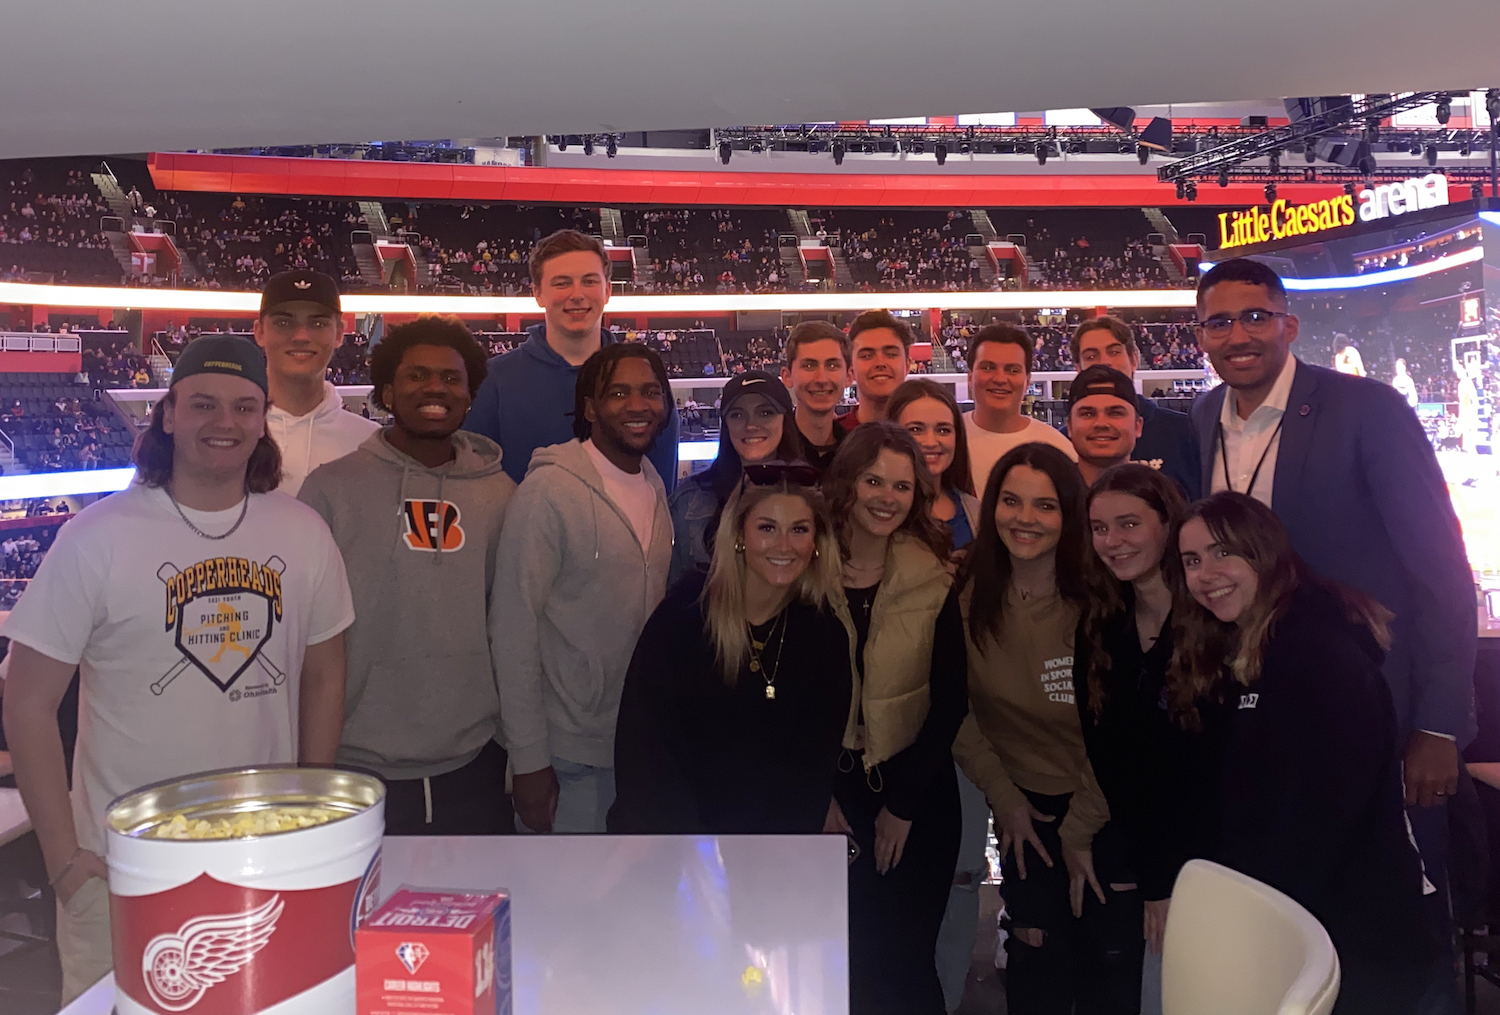 A group of Ohio University students smile at a Detroit Pistons game with alumnus Brad Fain